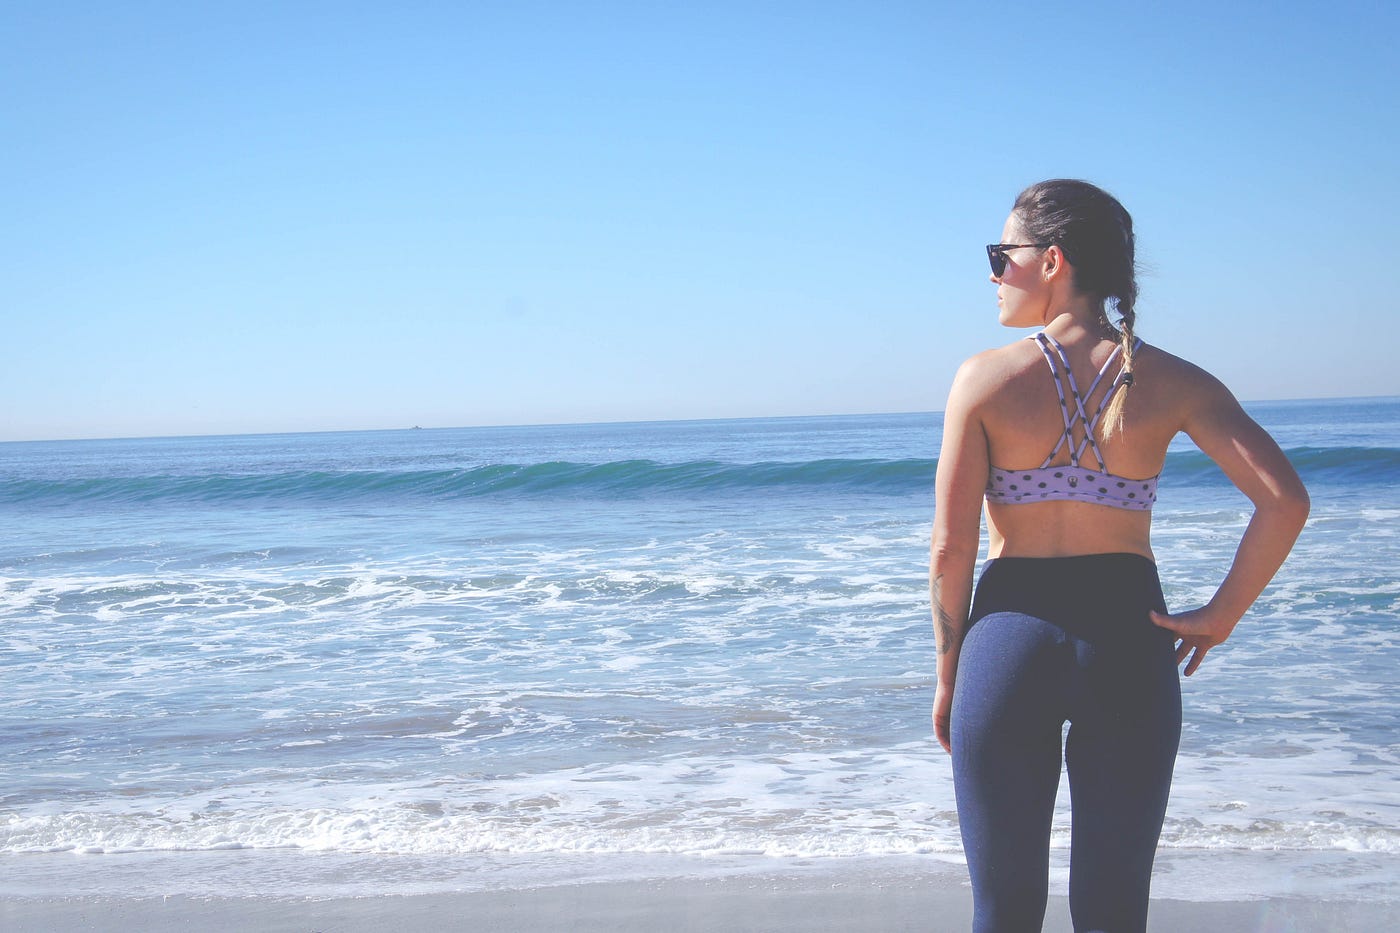 Your Recycled Plastic Yoga Leggings Aren't Going to Save the Environment., by Ashley Southard, The Startup